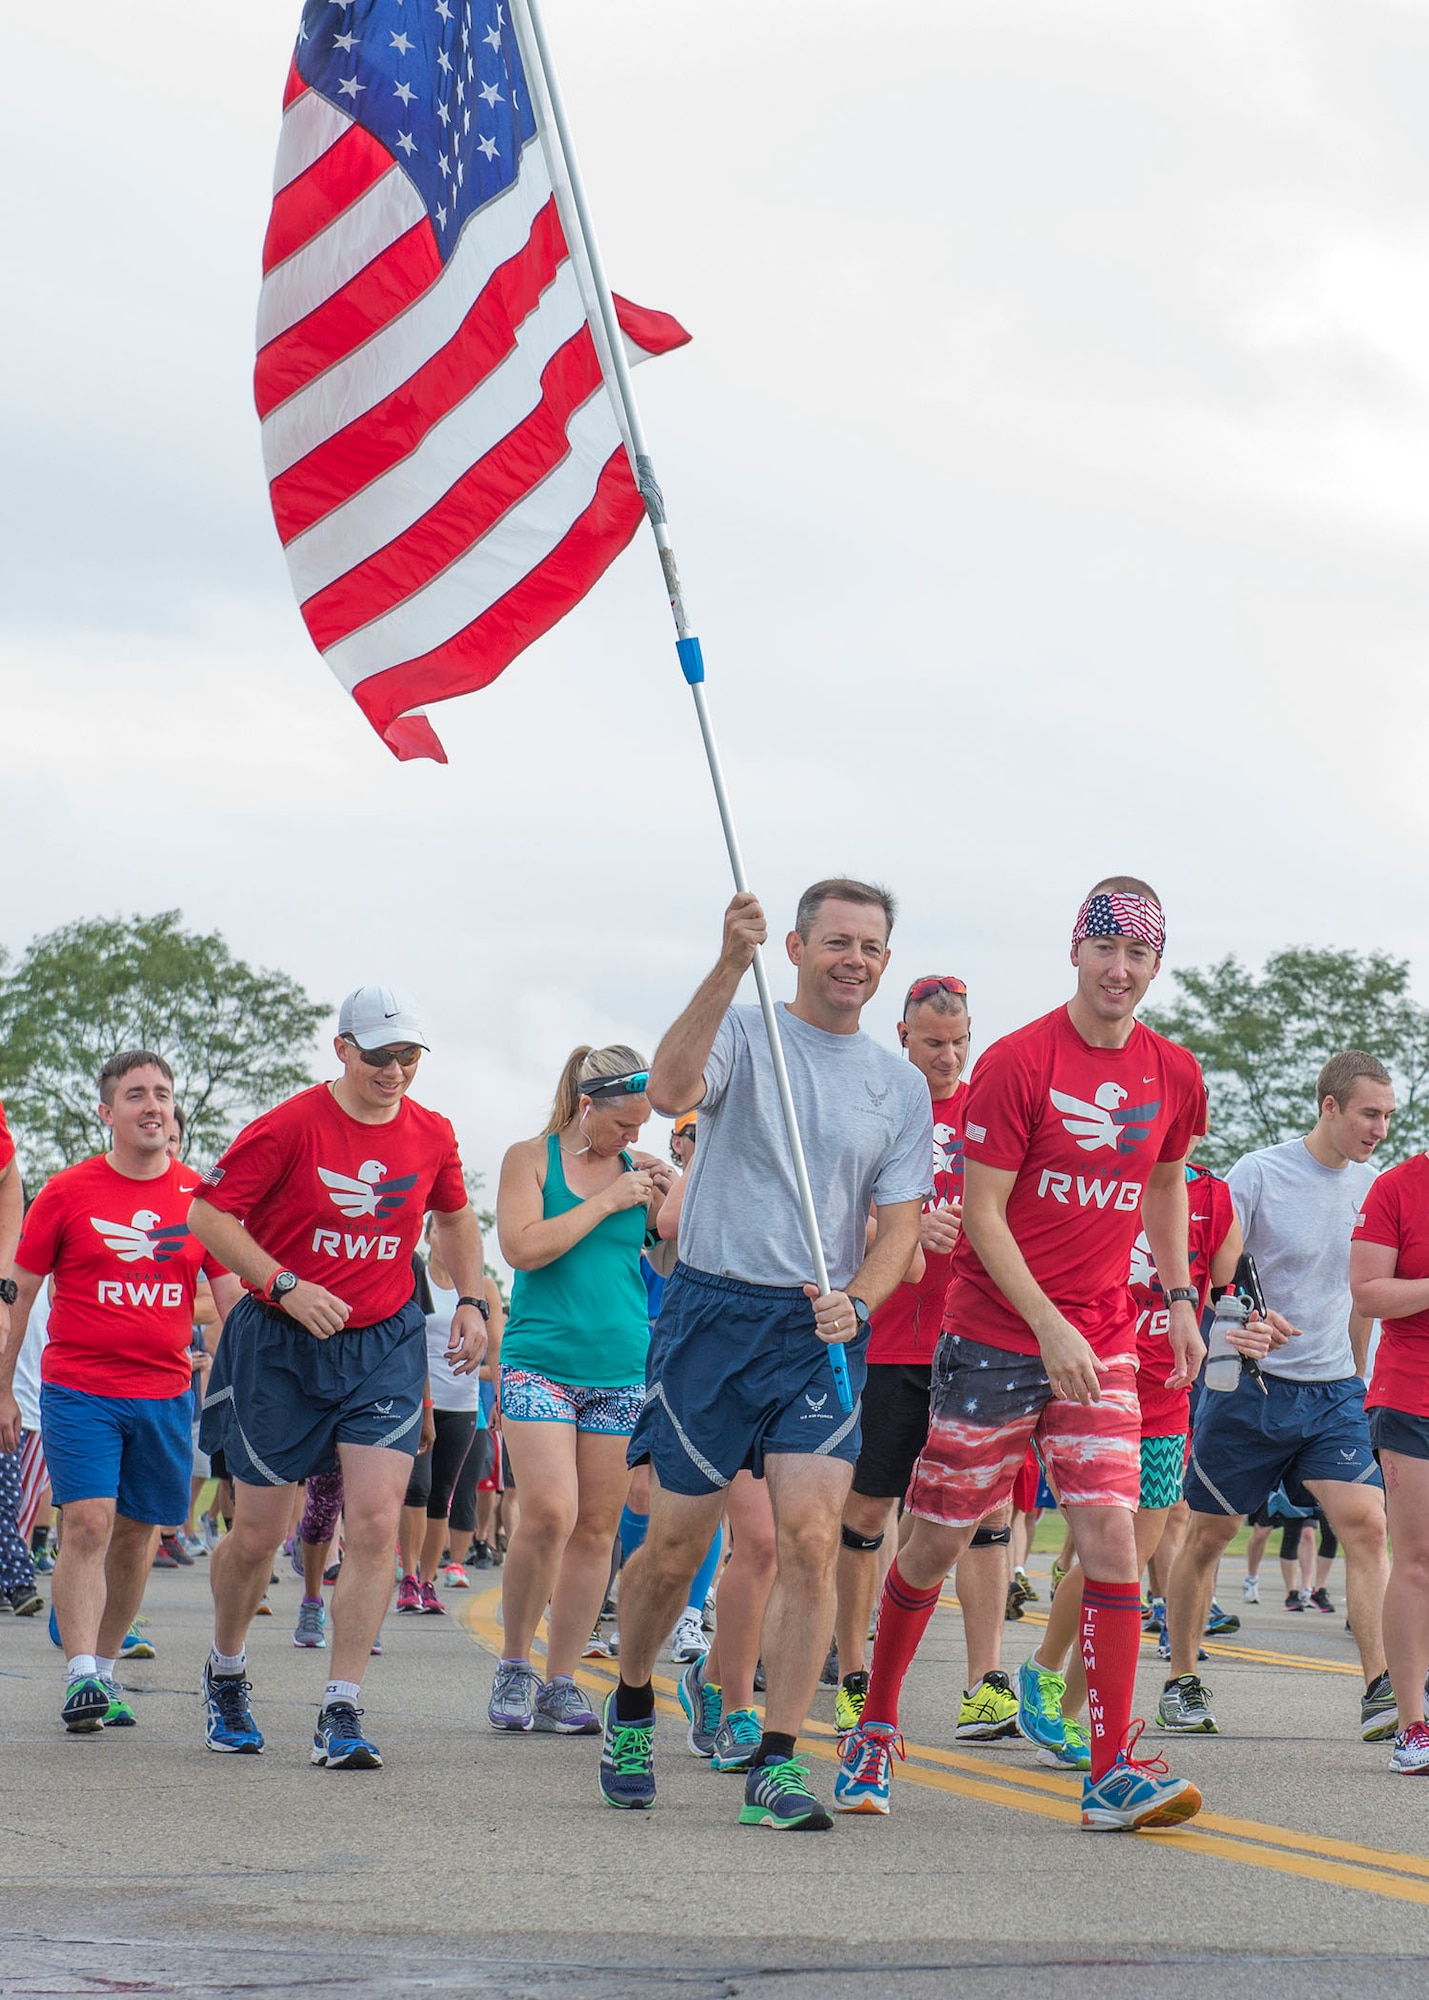 U.S. Air Force Col. Bradley McDonald, 88th Air Base Wing commander holds the U.S. flag during the Run for the Fallen on Area B flight line at Wright-Patterson Air Force Base, Ohio, September 9, 2016.  The Run for the Fallen provides an opportunity to remember and honor those who lost their lives and recognize those who continue to defend the nation. (U.S. Air Force photo by Michelle Gigante)